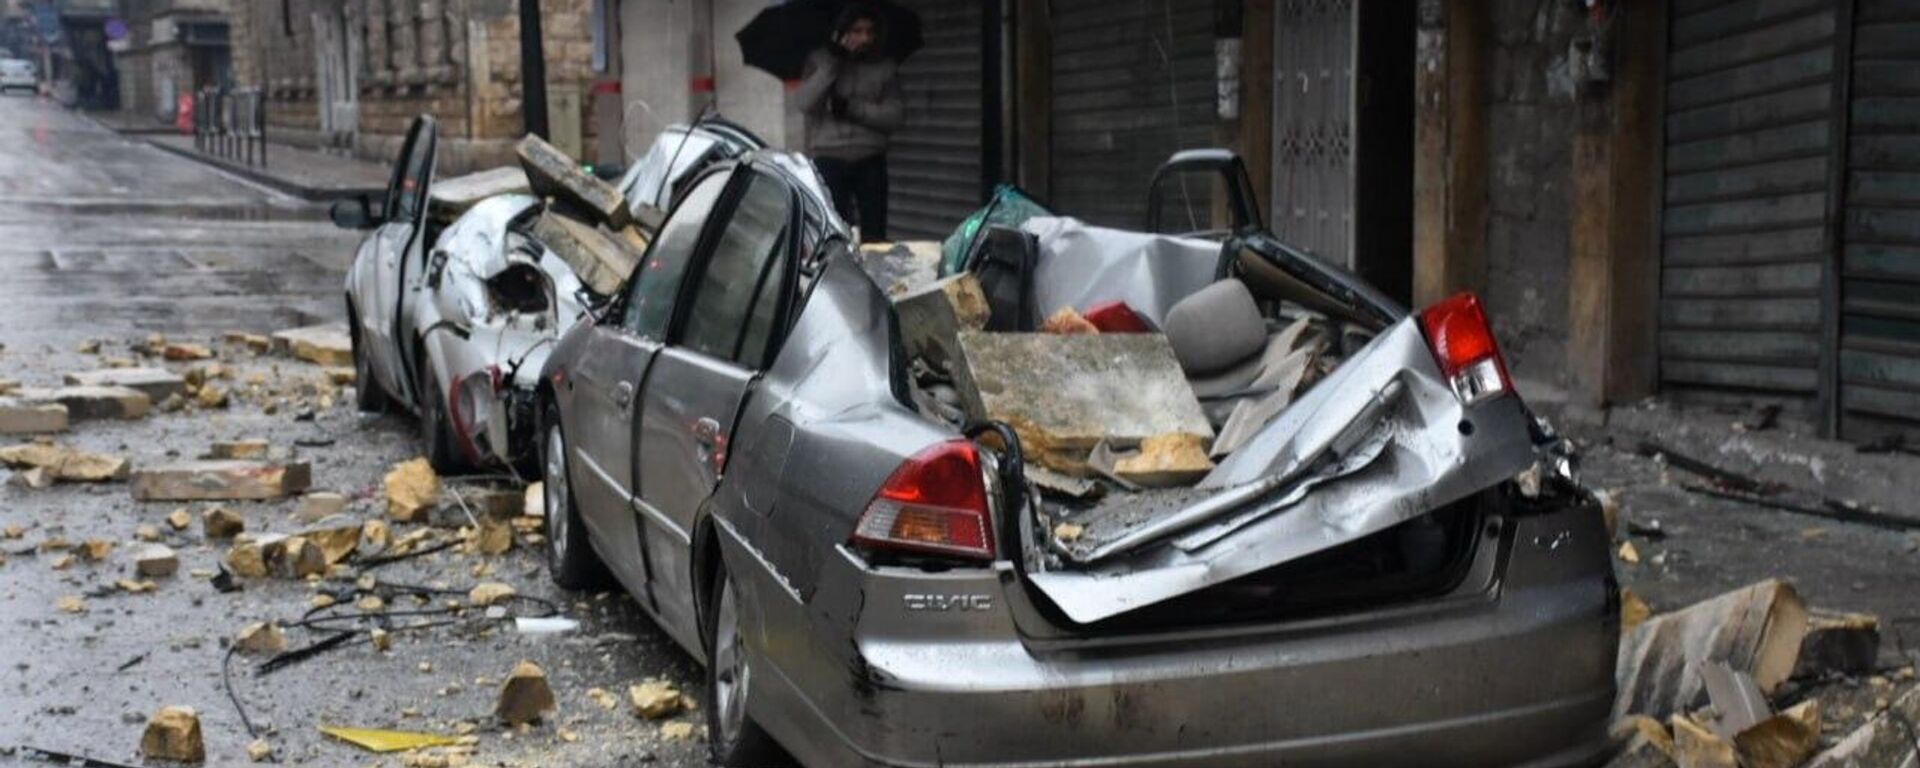 Damaged vehicles after buildings collapsed in Syria's Aleppo following a powerful earthquake. - Sputnik International, 1920, 07.02.2023